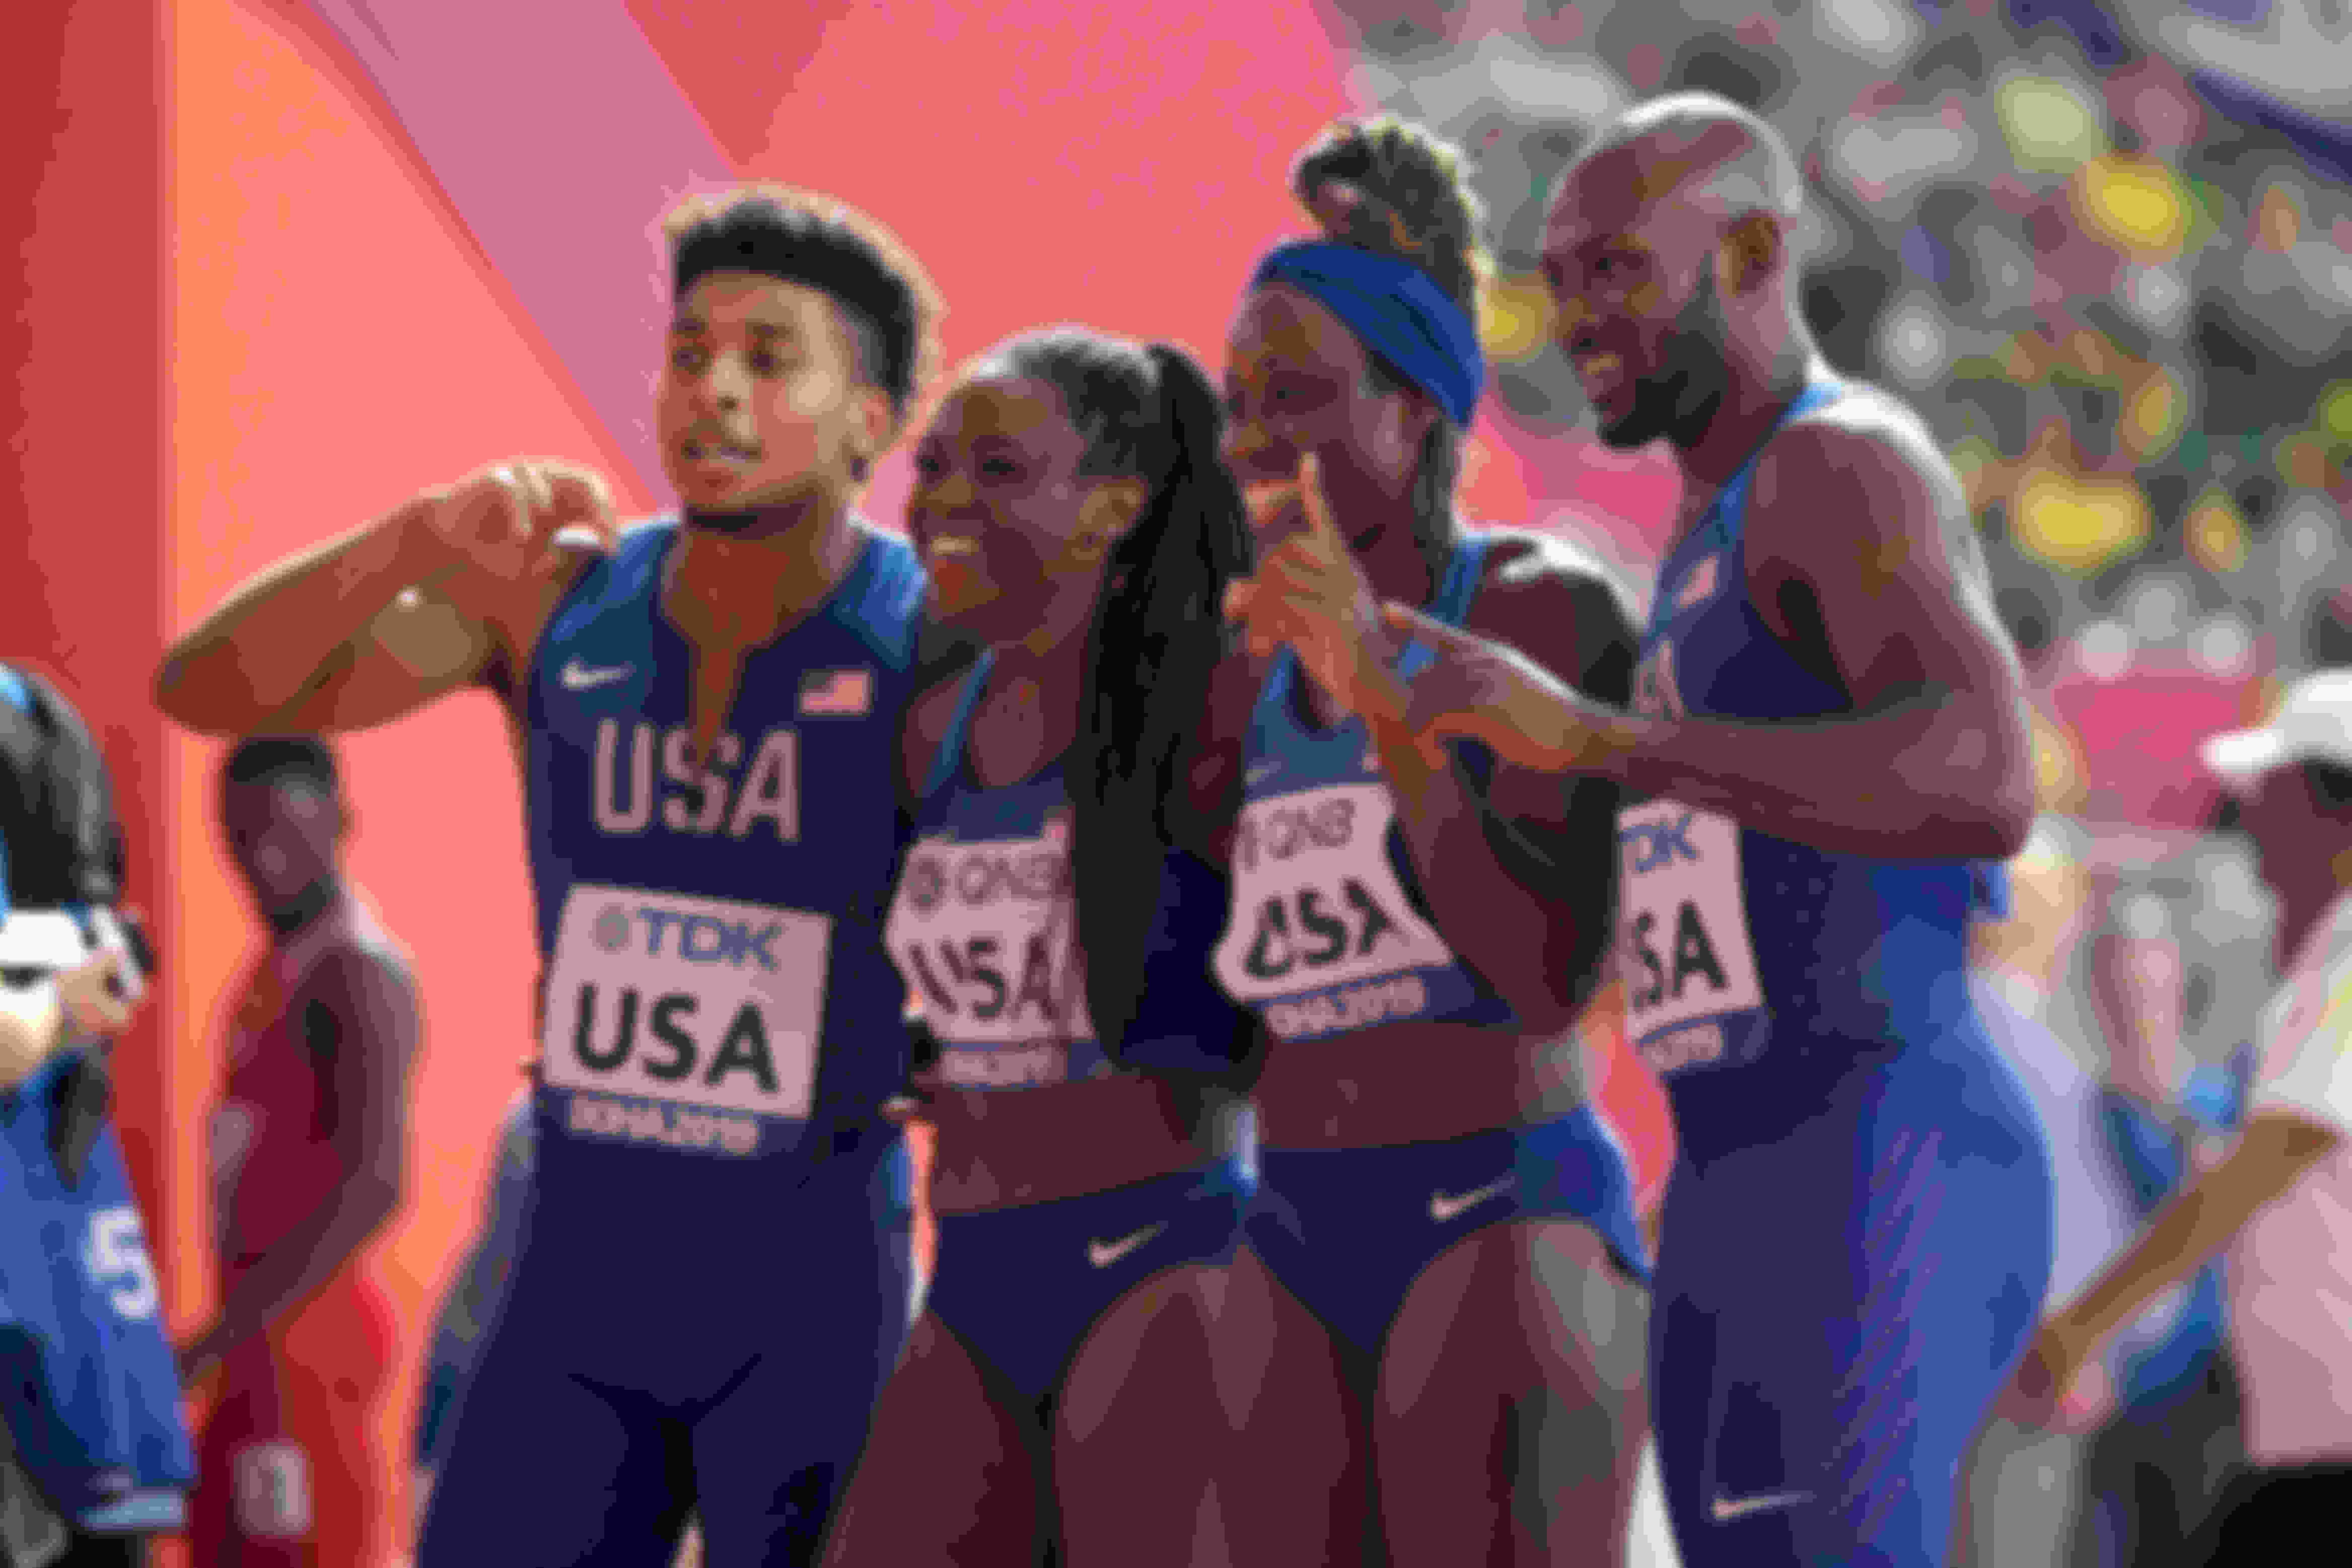 The USA set a new world record in the 4x400m mixed relay.